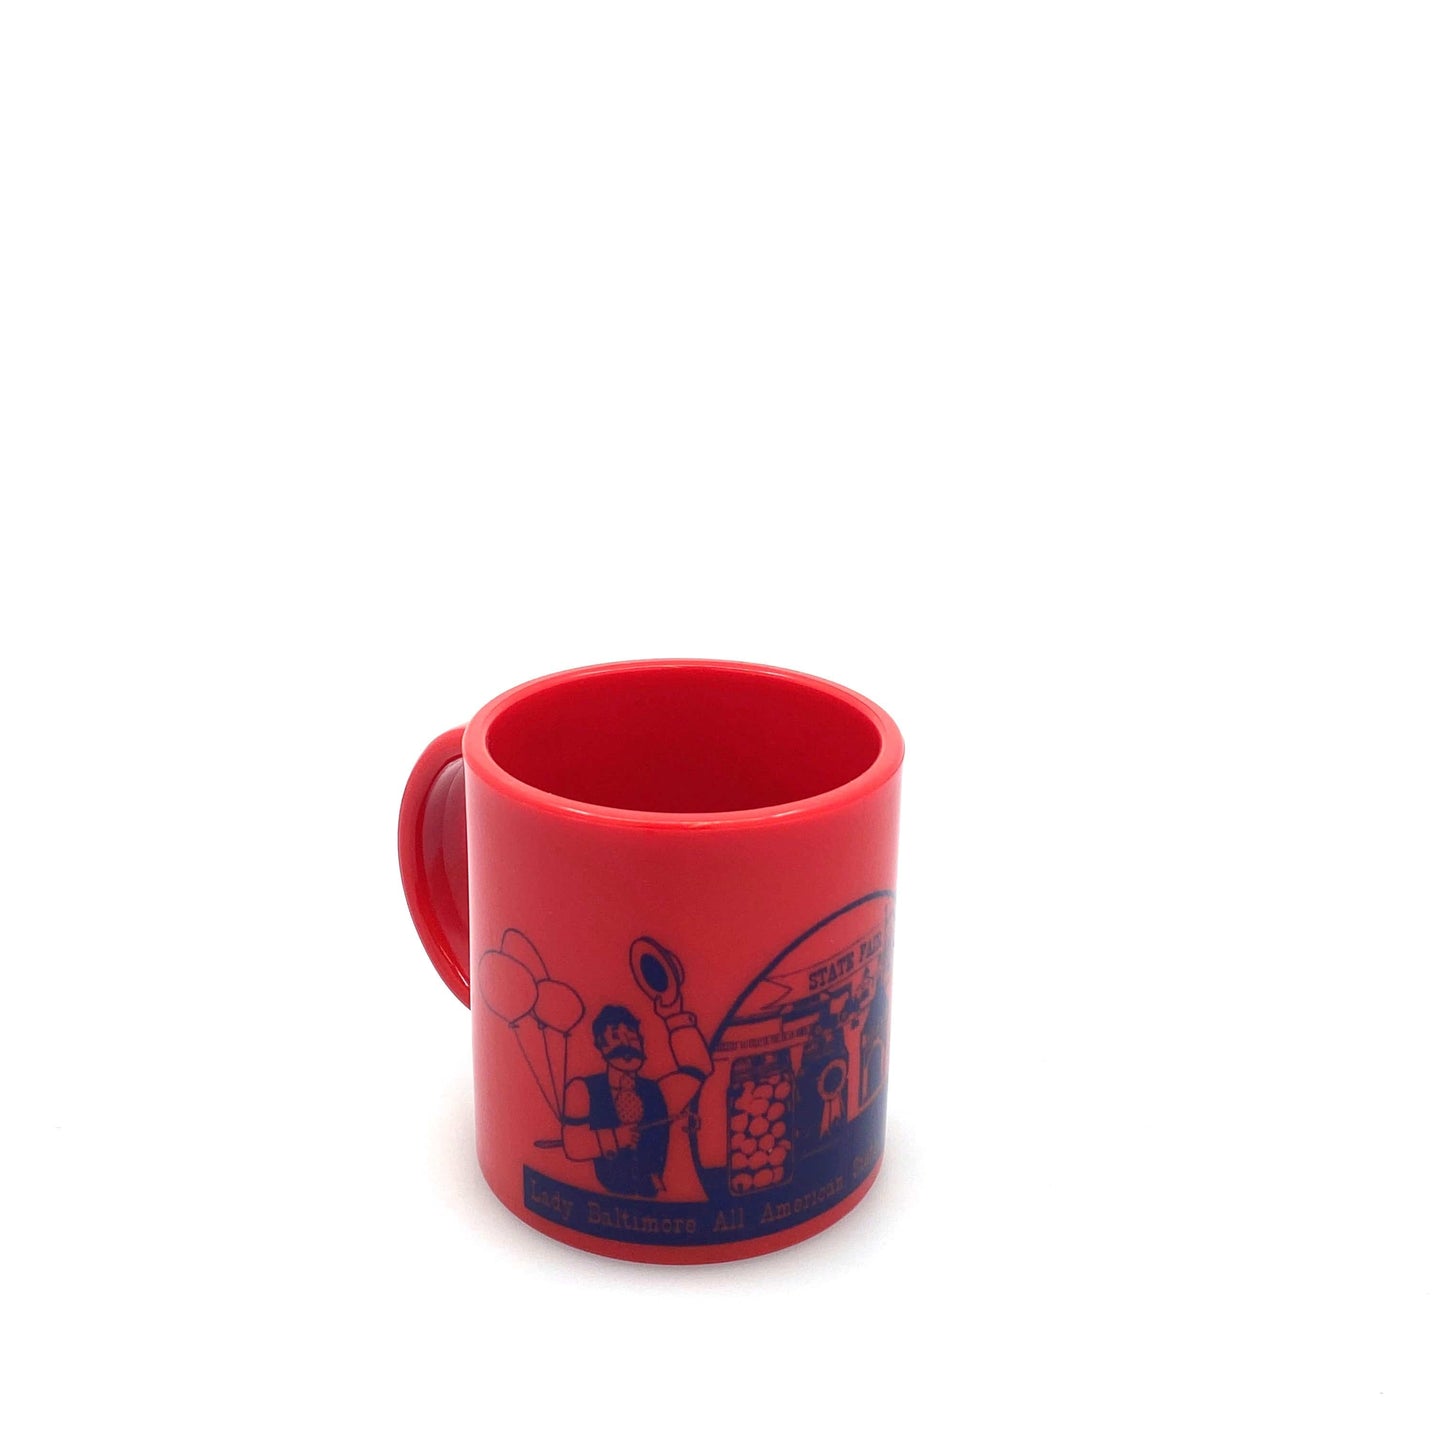 Lady Baltimore All American State Fair 1985 Red Plastic Cup Souvenir